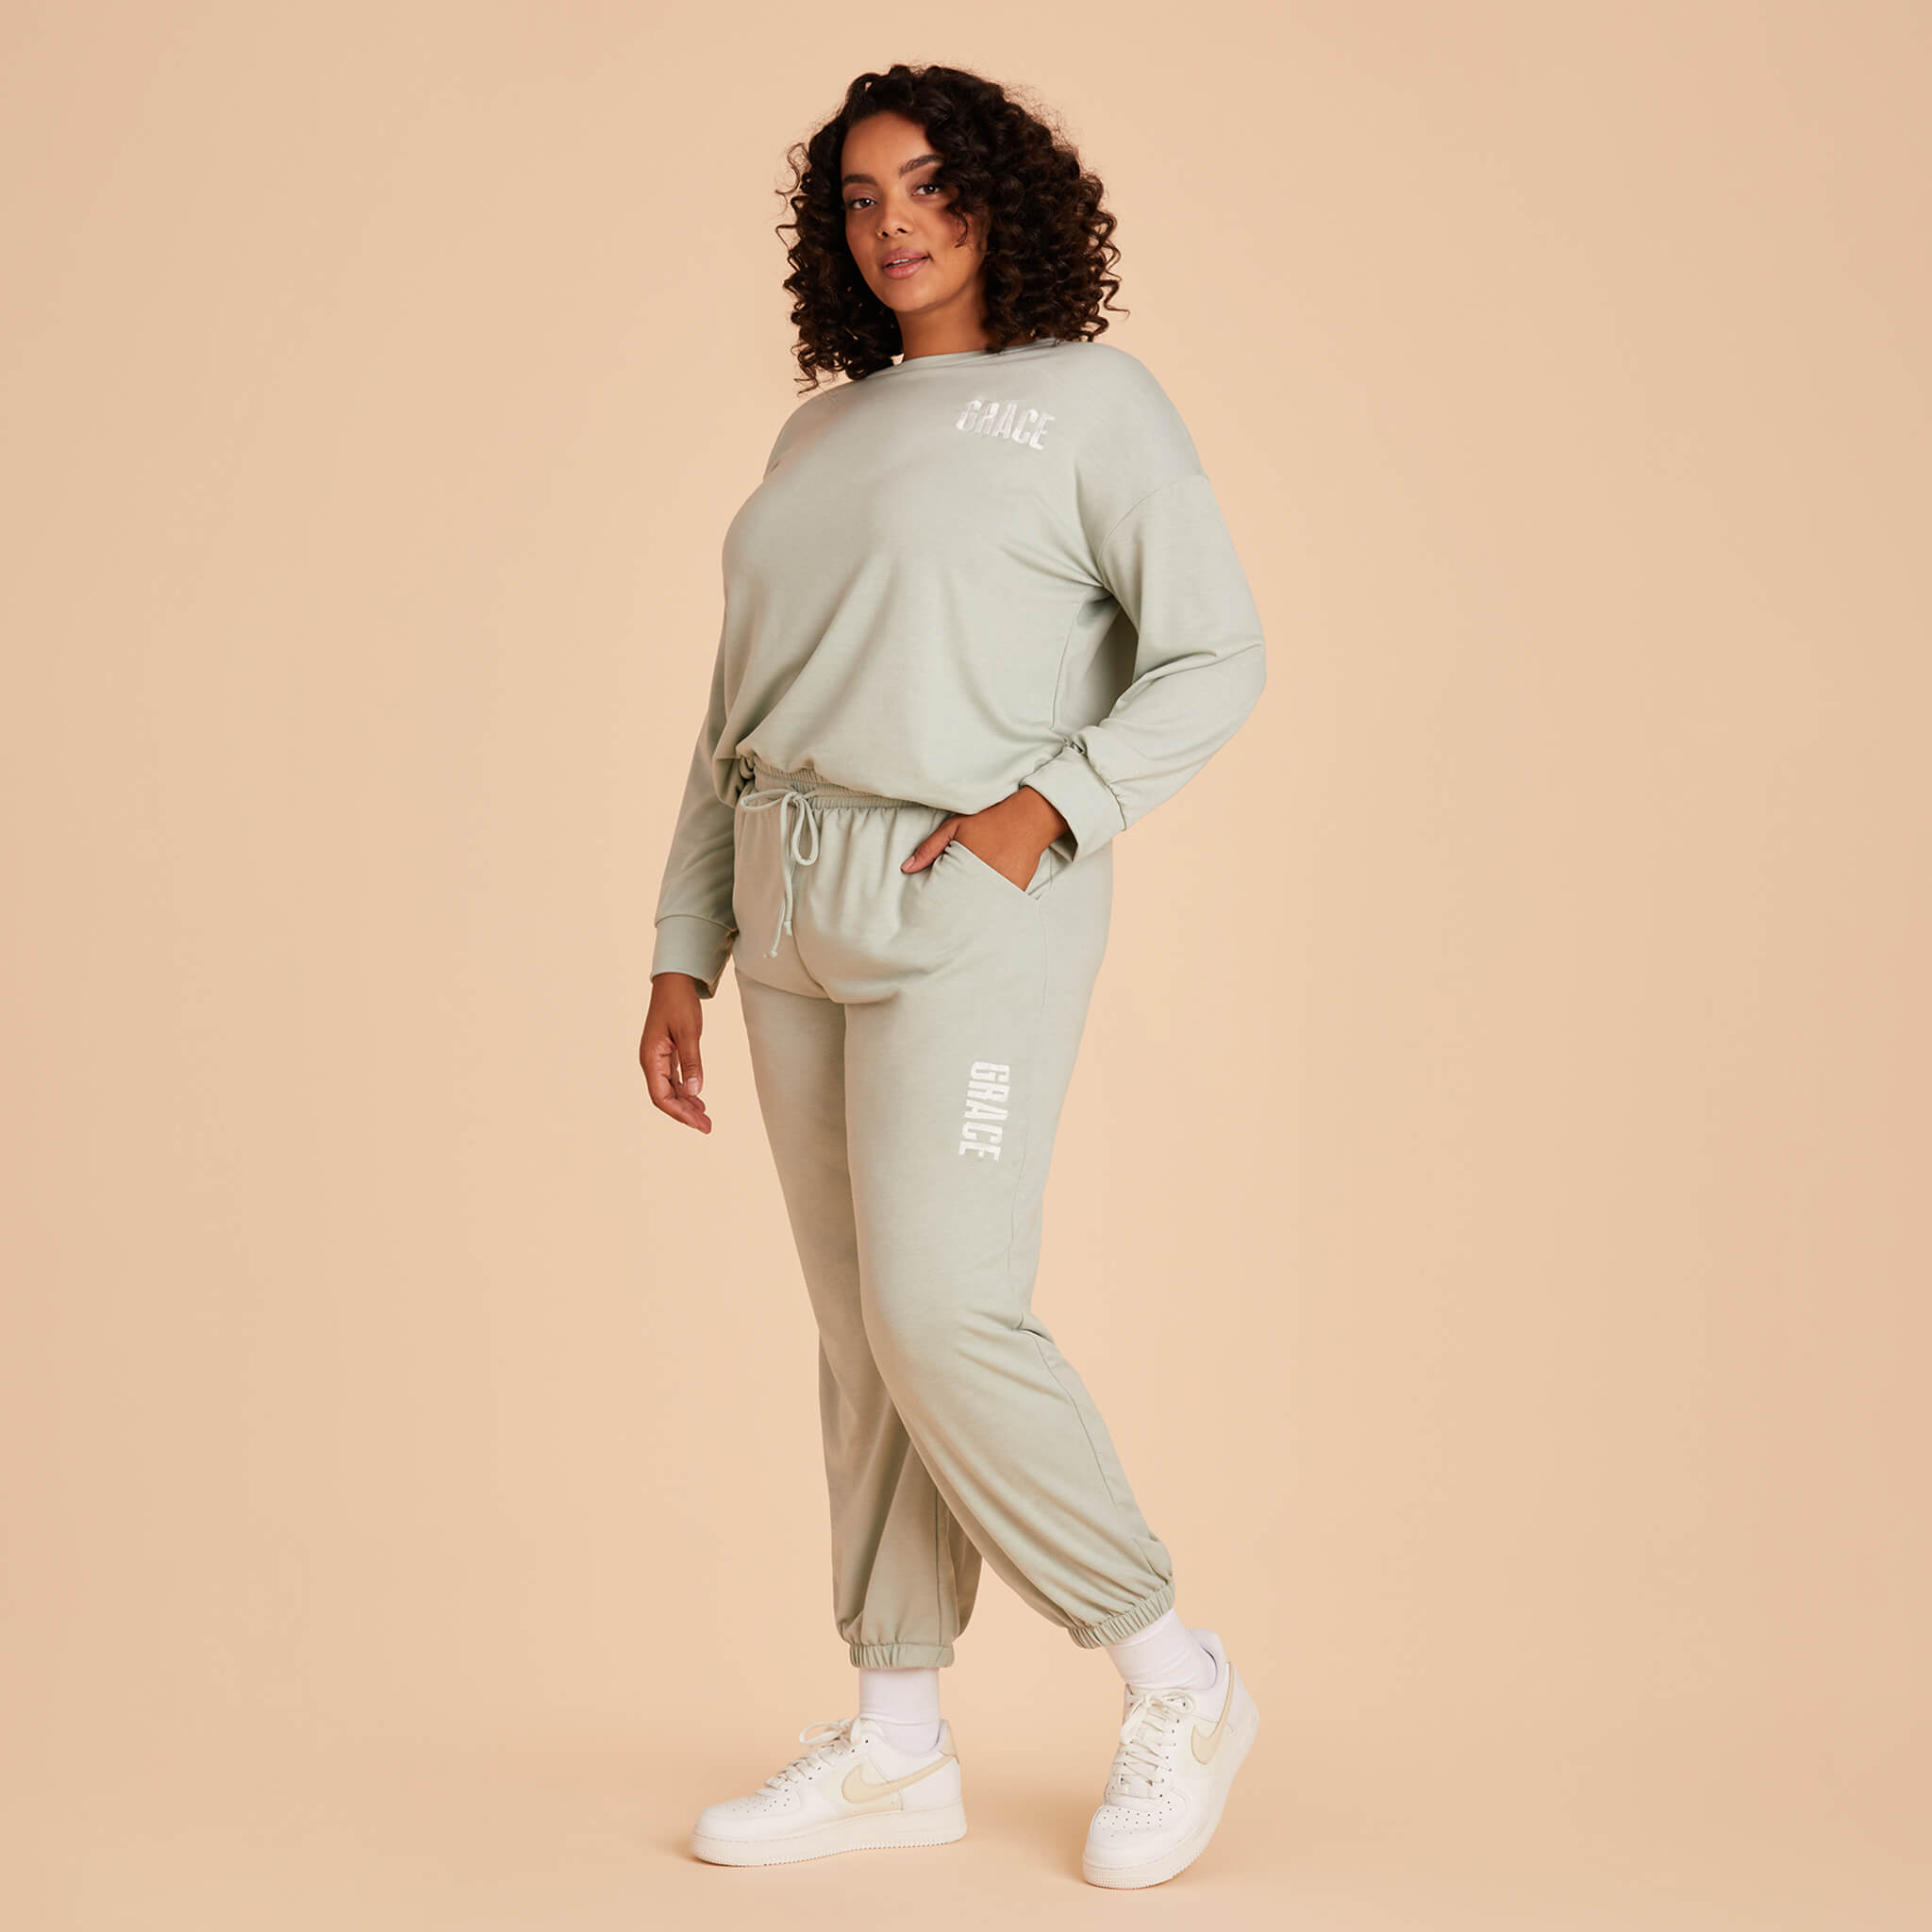 Plus Size Crew Neck Sweatshirt and sweatpants Loungewear in Sage Light Green with personalization